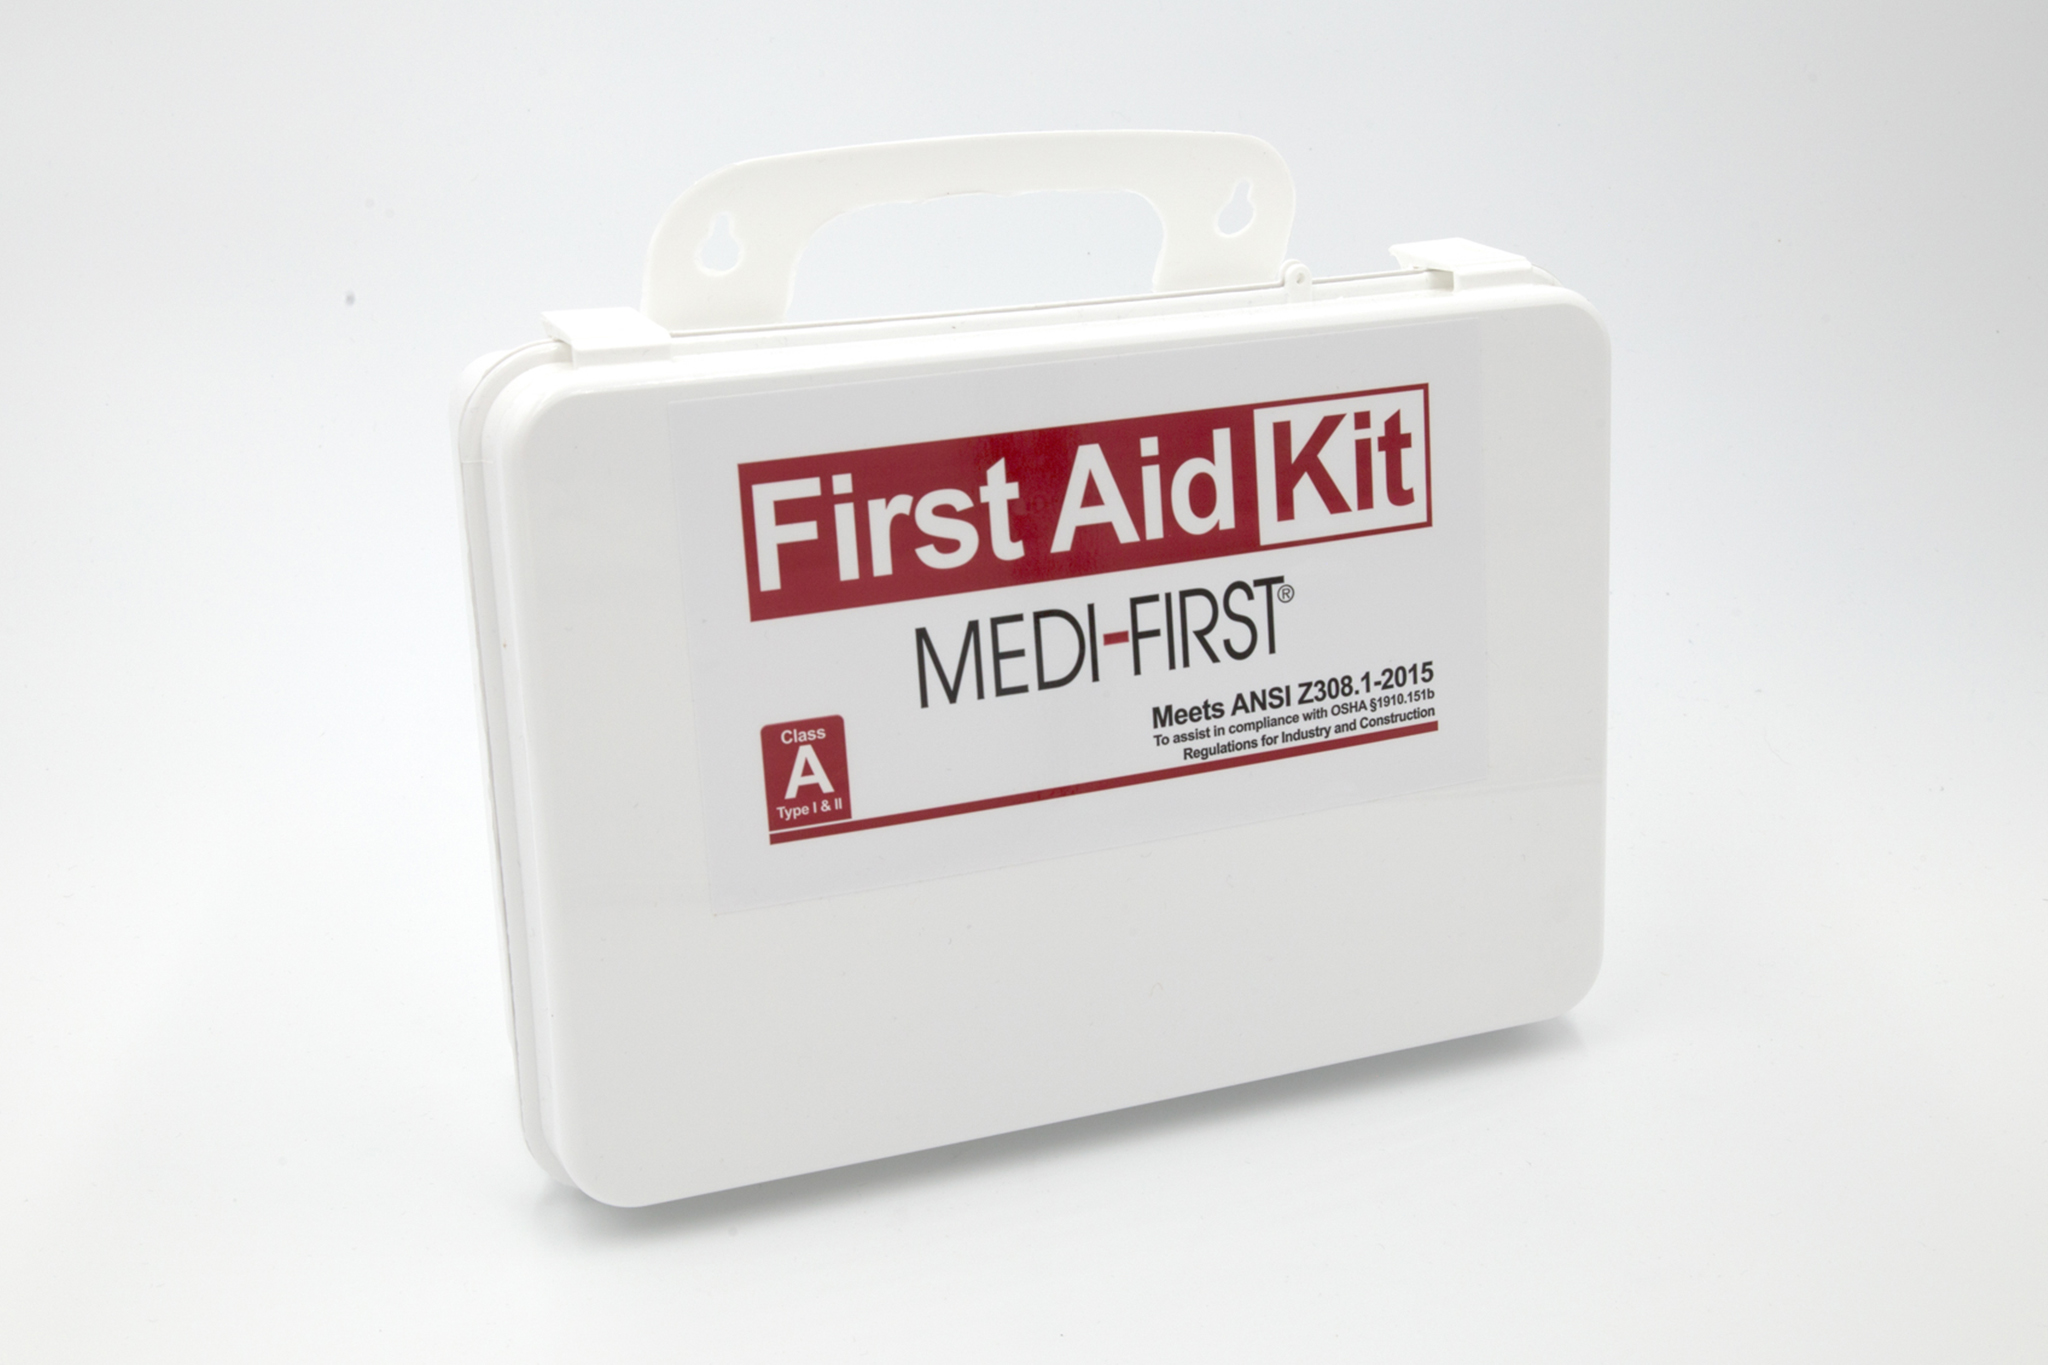 First aid kit box on white background